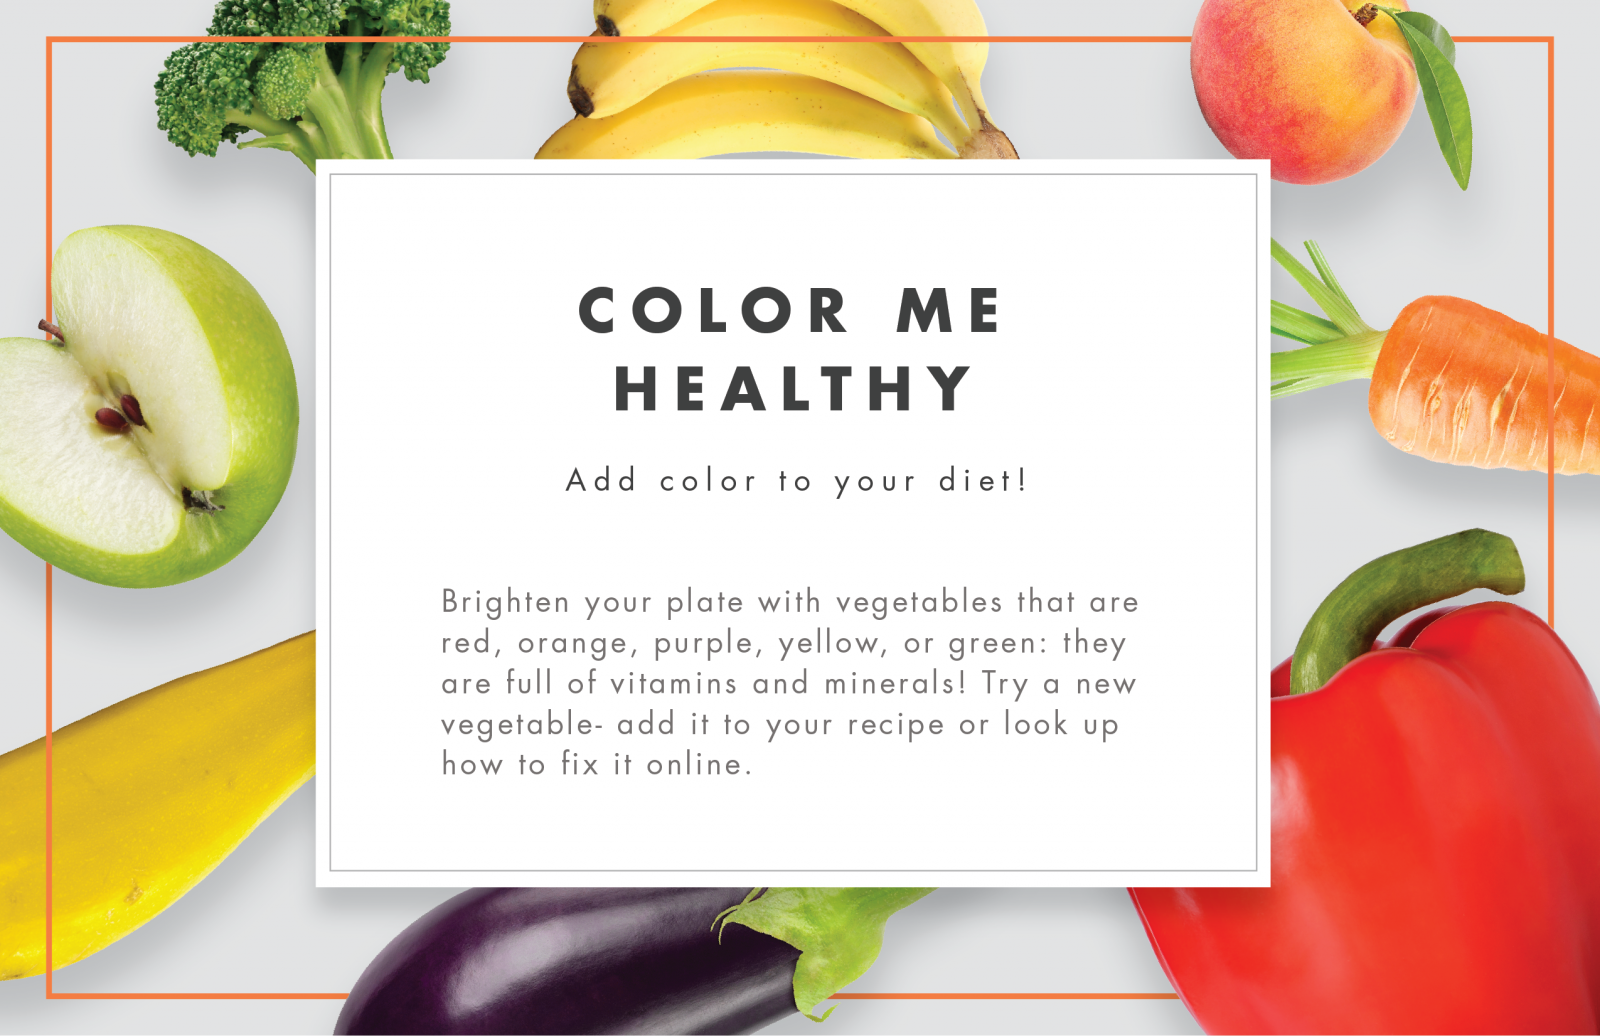 colormehealthy5-01